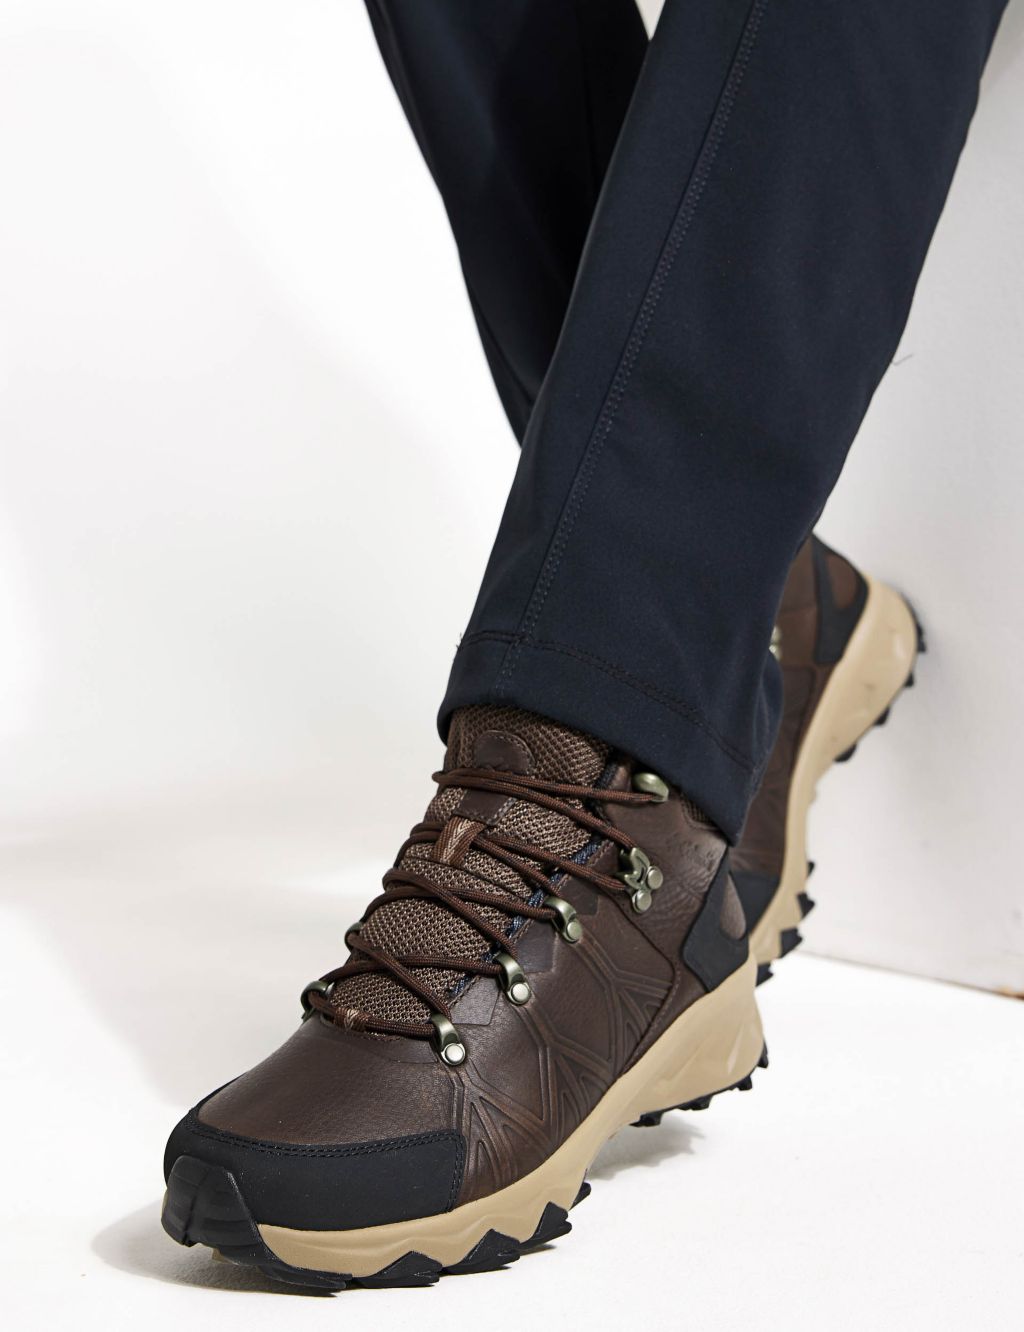 Peakfreak II Mid Outdry Leather Shoes image 7